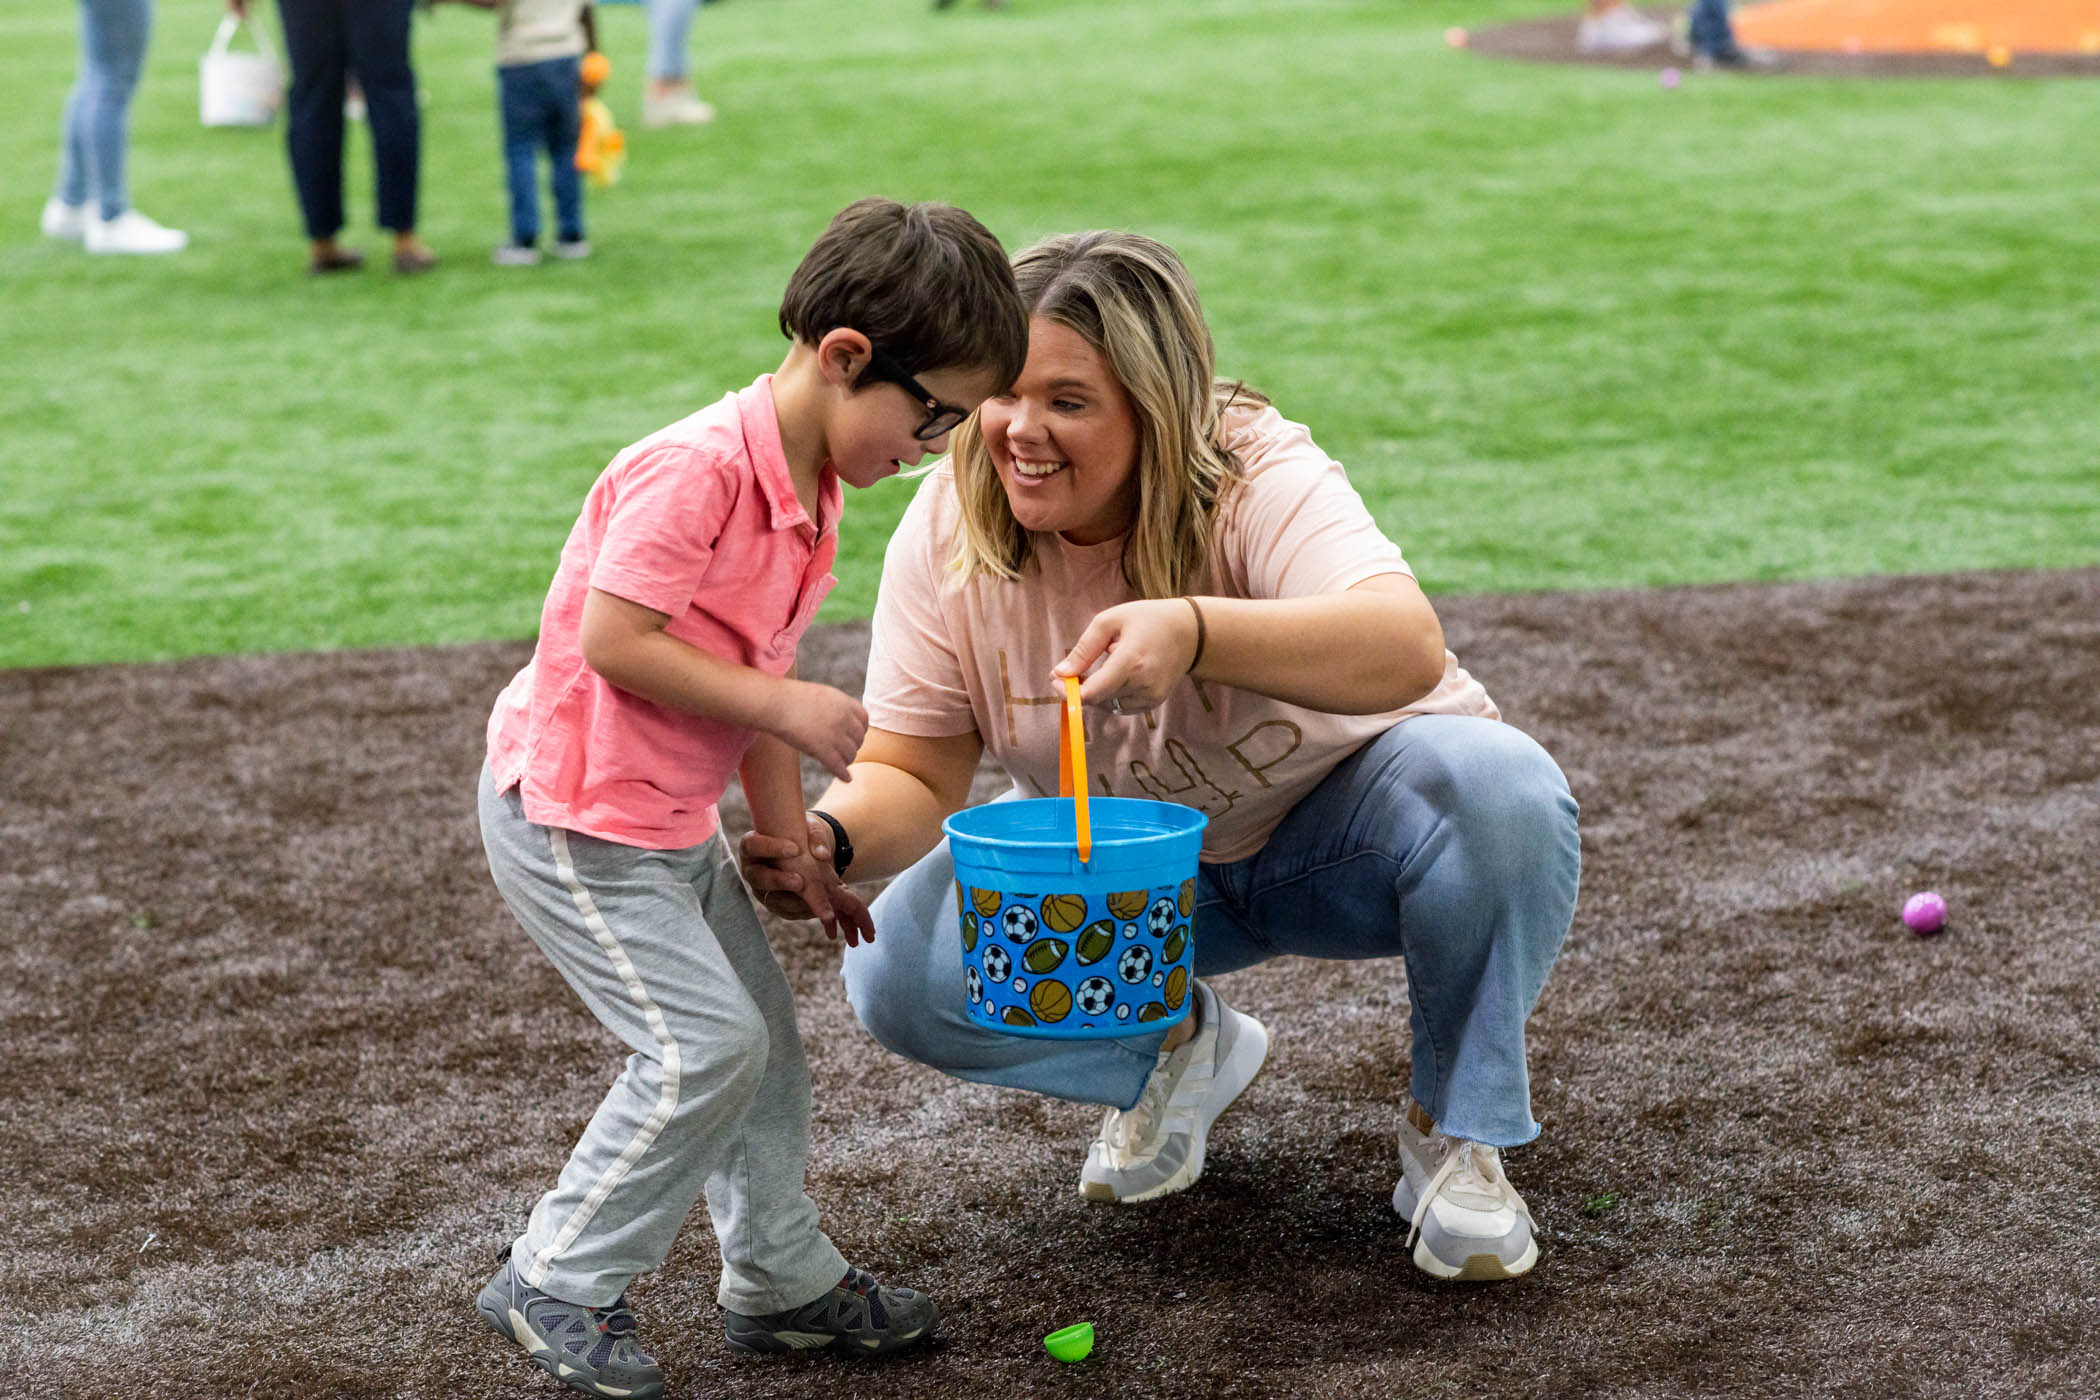 T.K. Martin Center for Technology and Disability Lead Teacher, McKenzie Foster, assists a student with collecting hidden eggs at an Easter Egg Hunt inside MSU&#039;s Palmiero Center in celebration of the upcoming spring holiday.